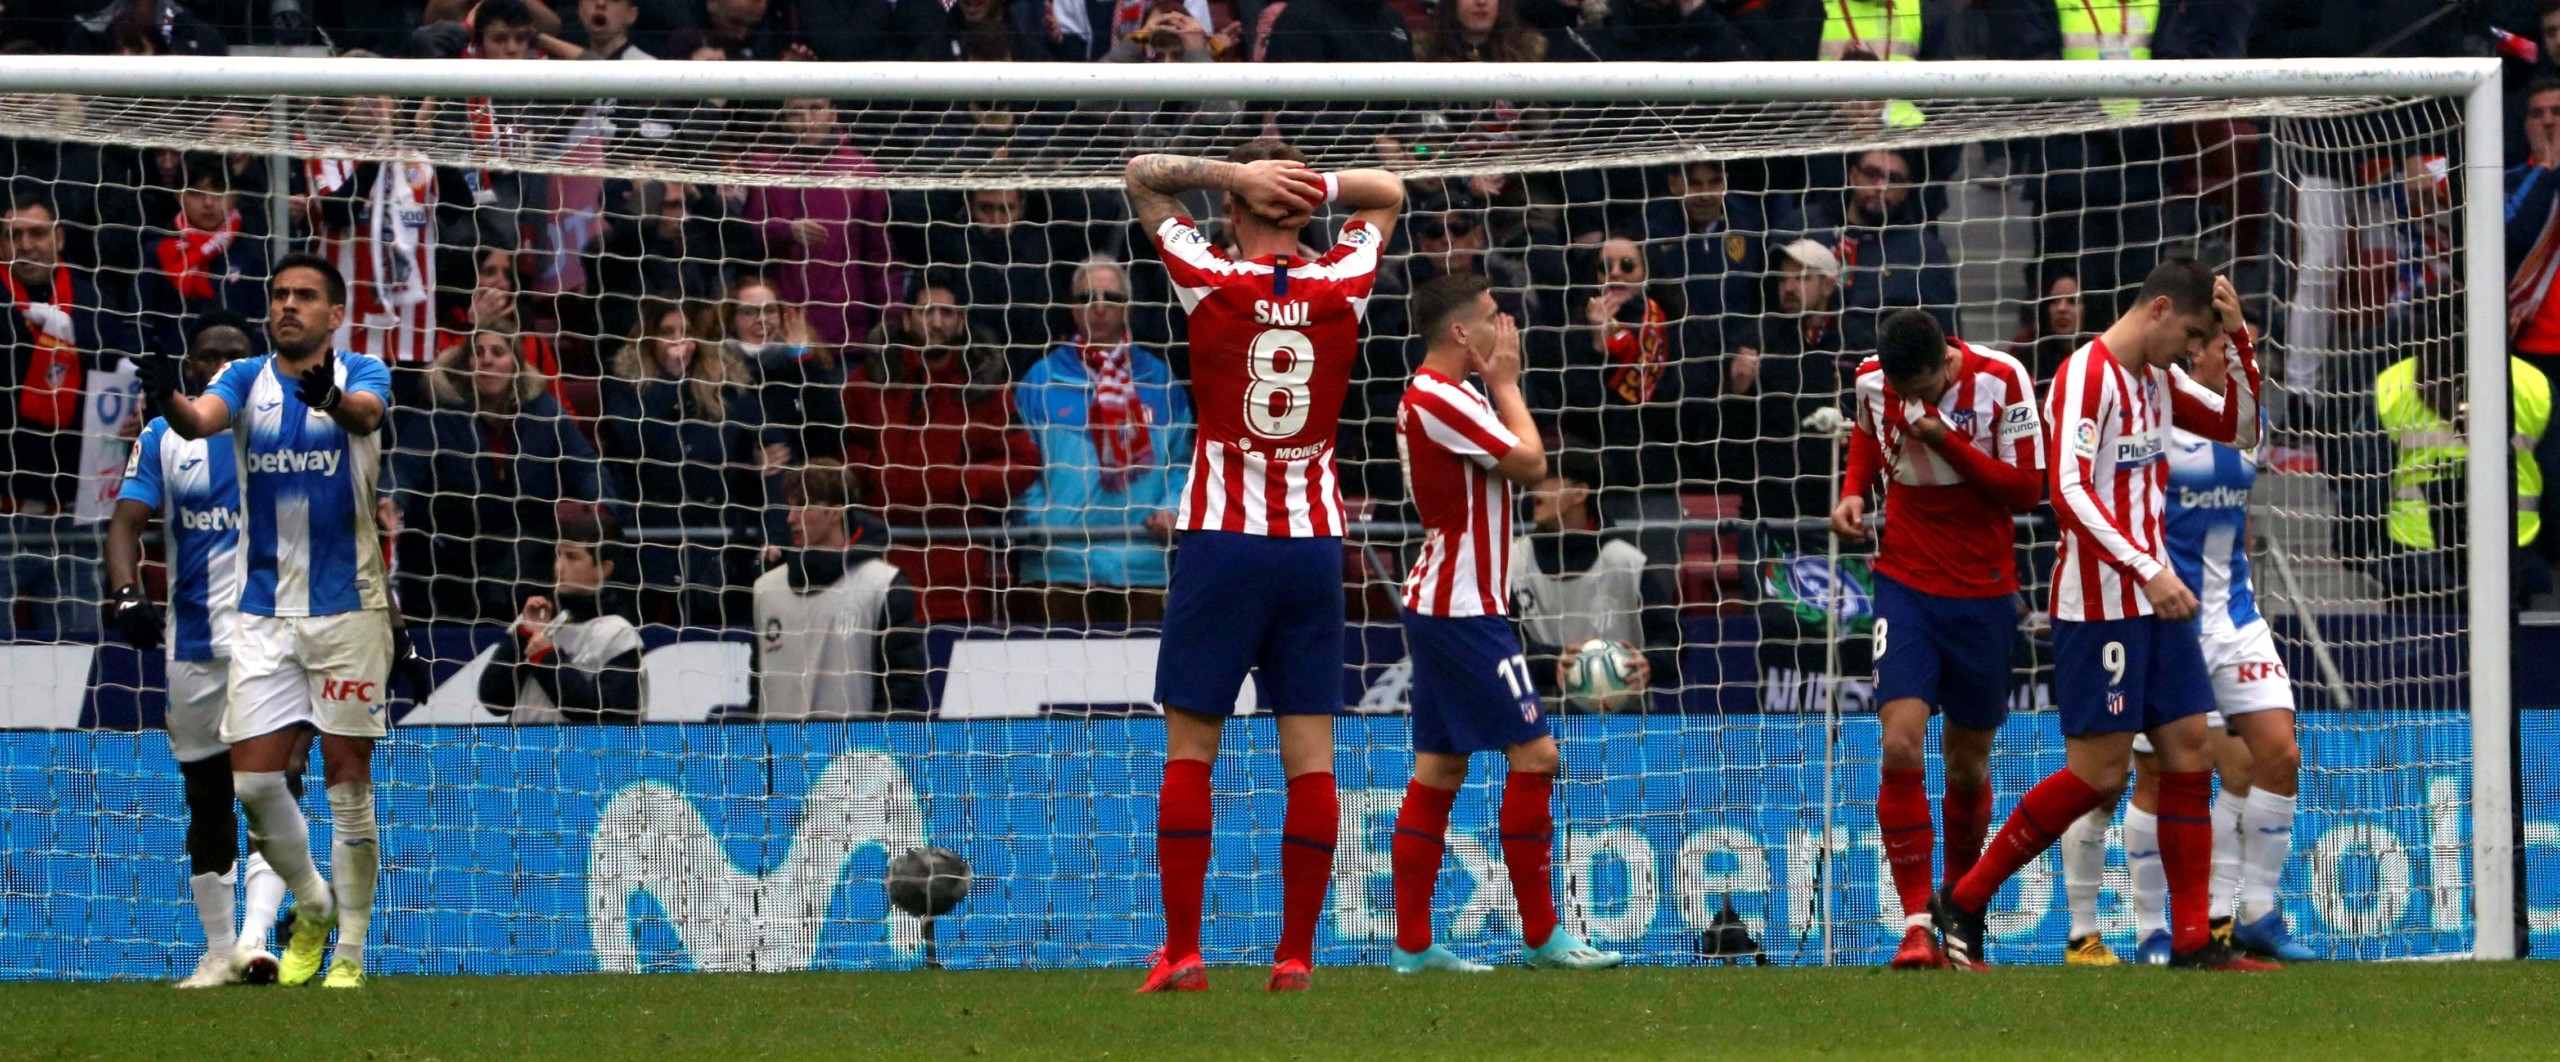 Weekly La Liga Roundup: Atlético’s struggles, Valencia’s unlikely form, and more